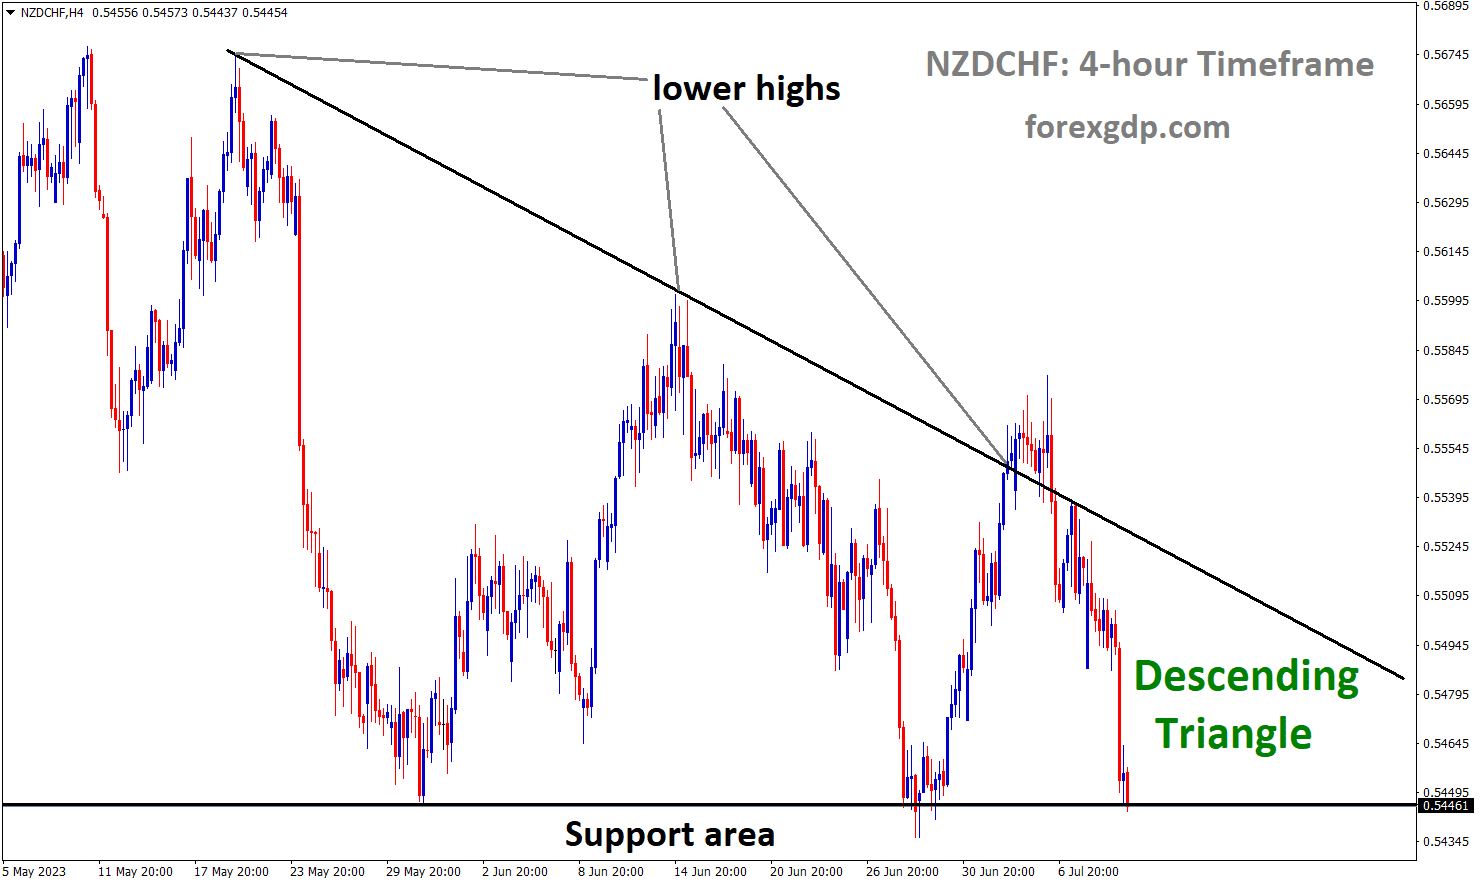 NZDCHF H4 TF analysis Market is moving in the Descending triangle pattern